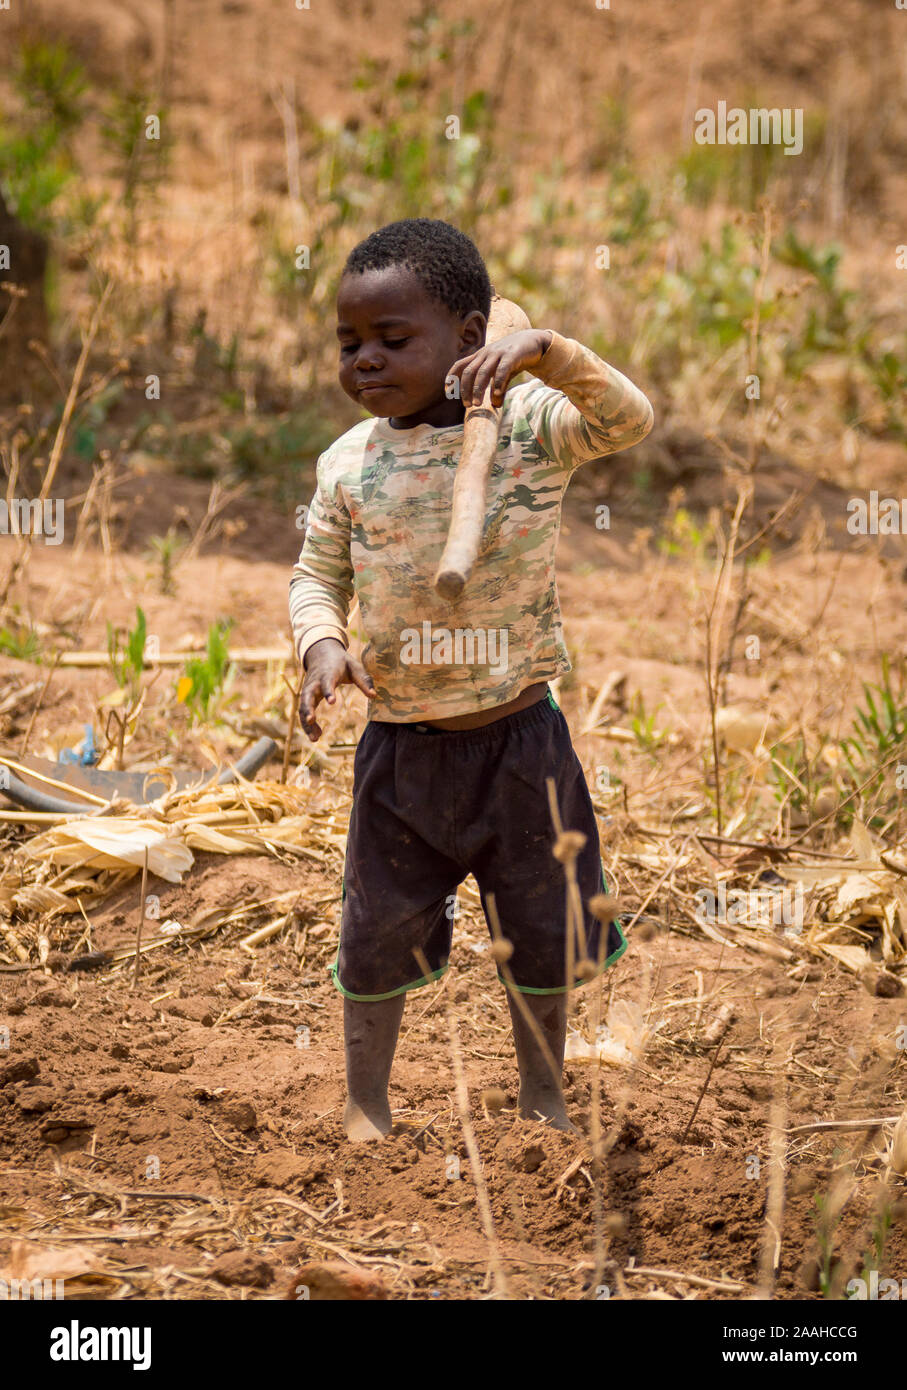 A young child in a rural village in Malawi picks up a hoe Stock Photo